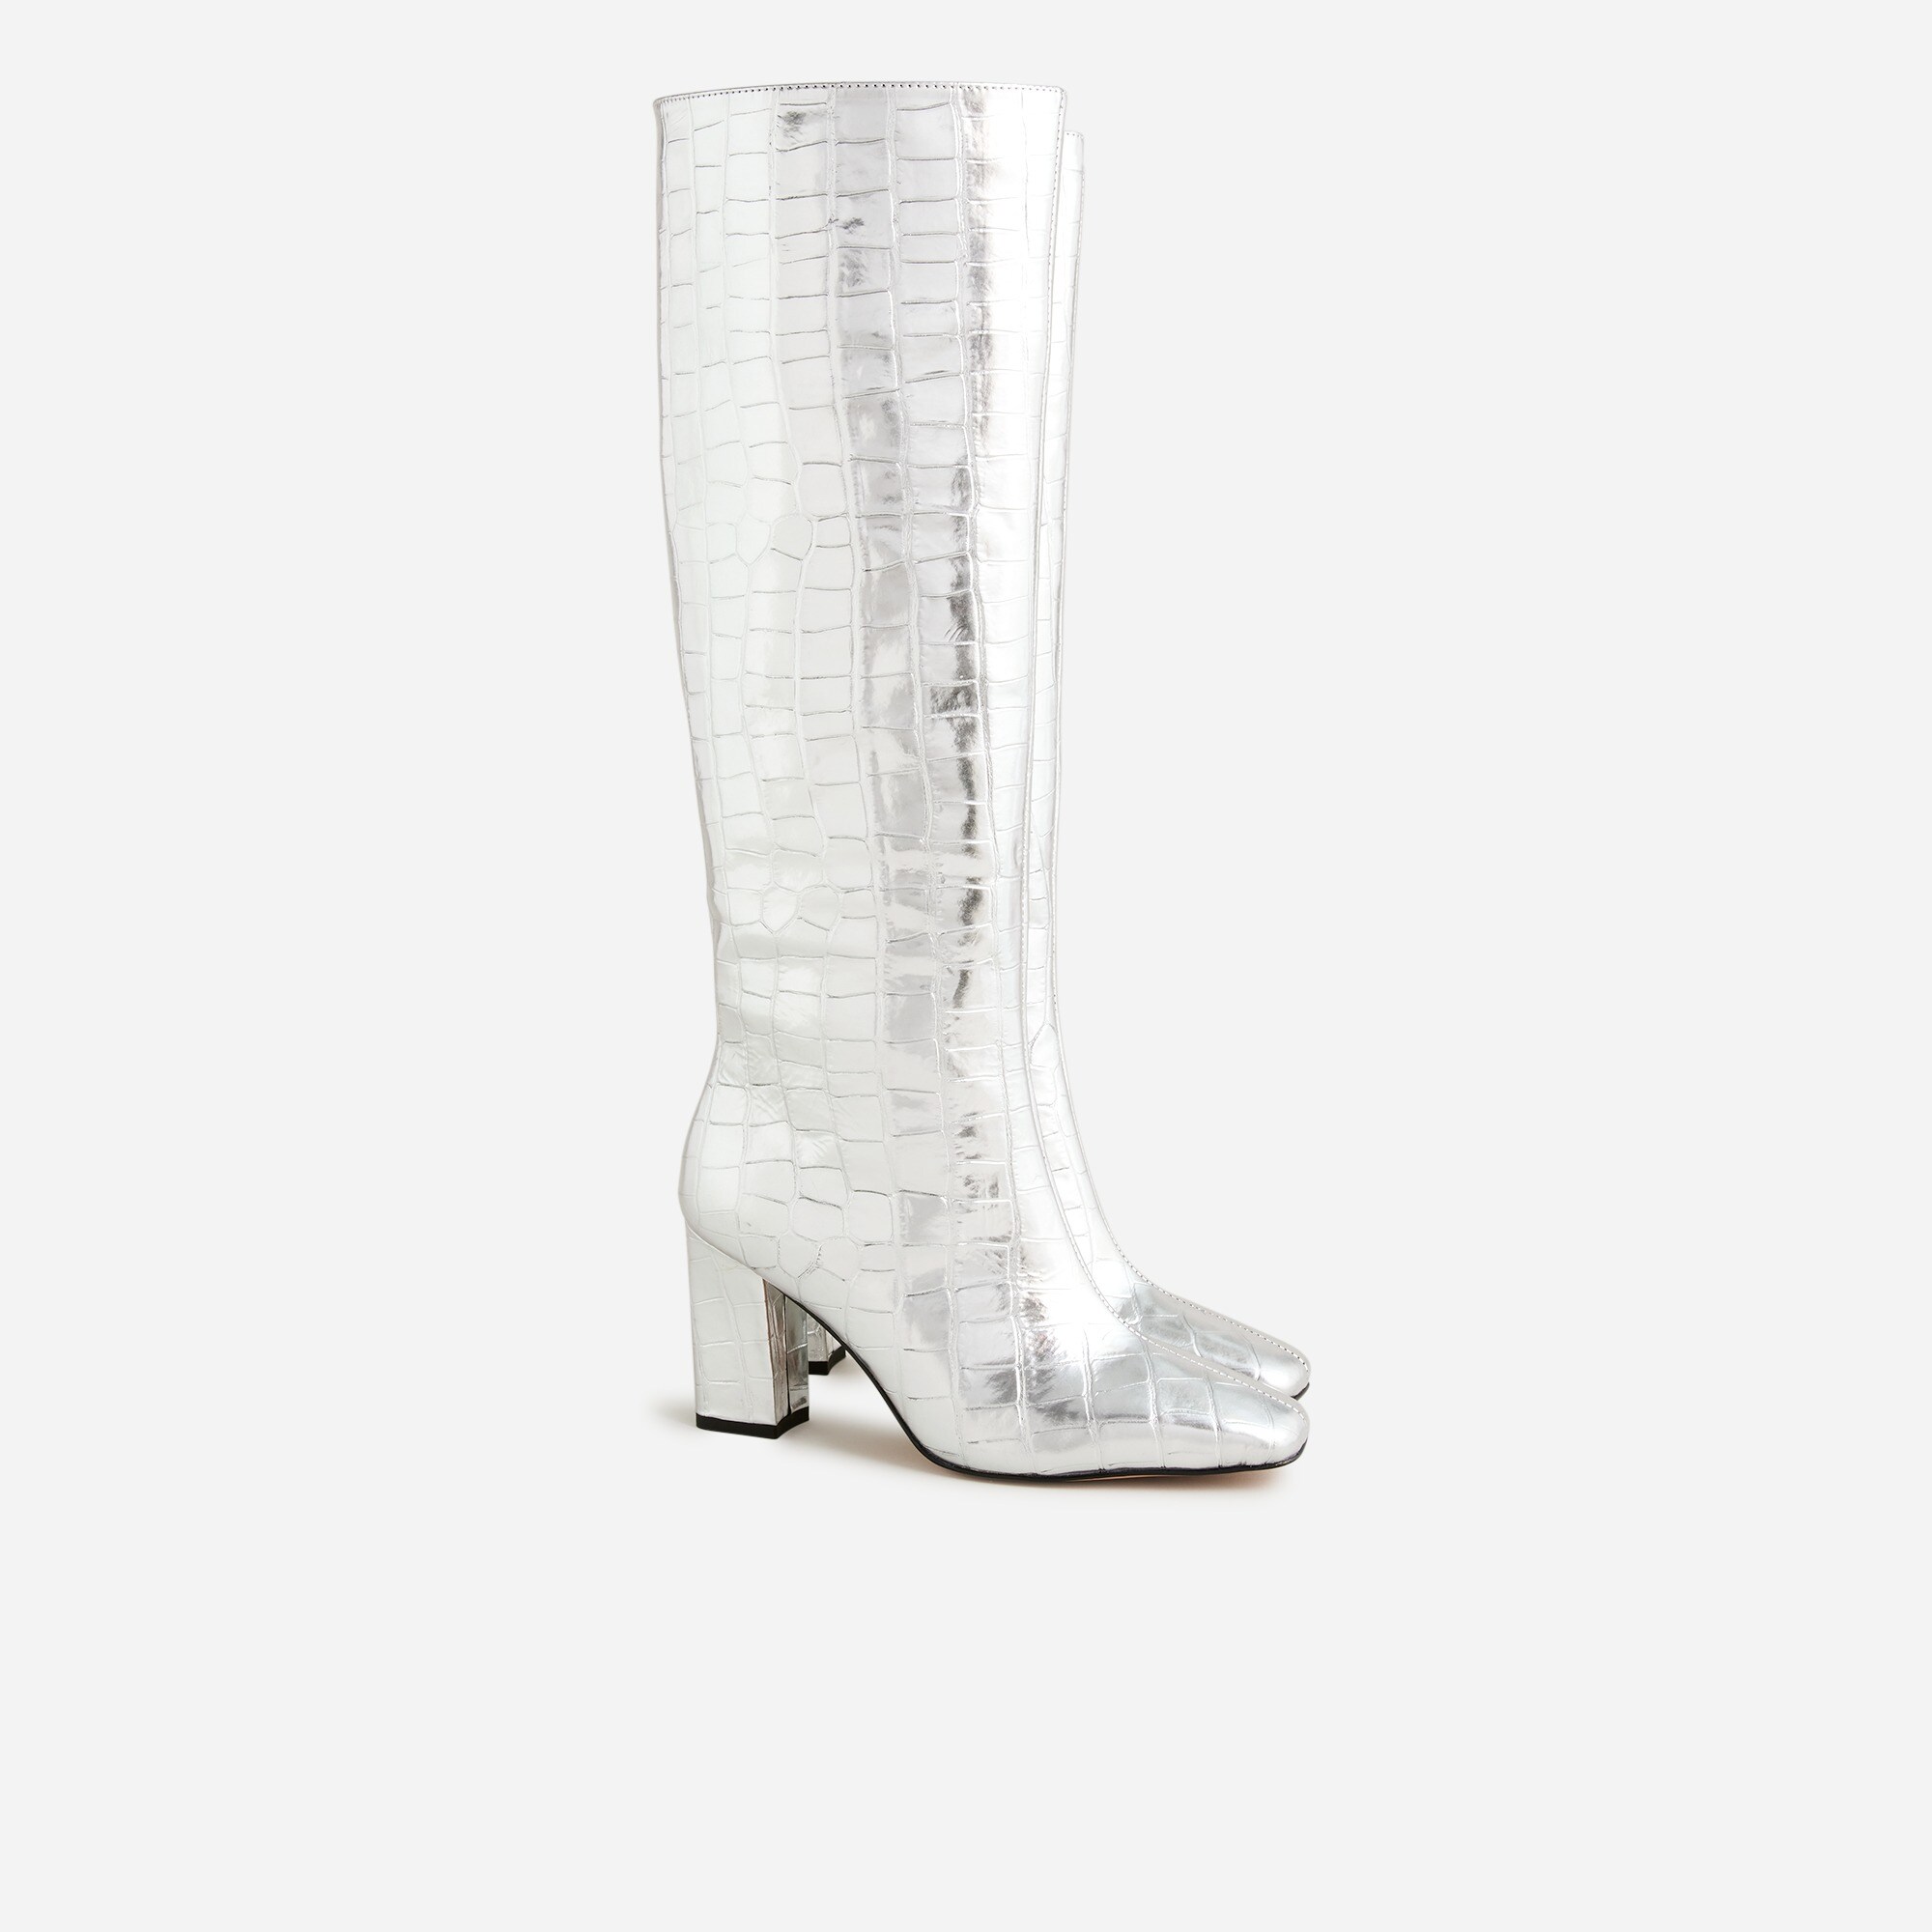  Collection limited-edition knee-high boots in croc-embossed metallic leather